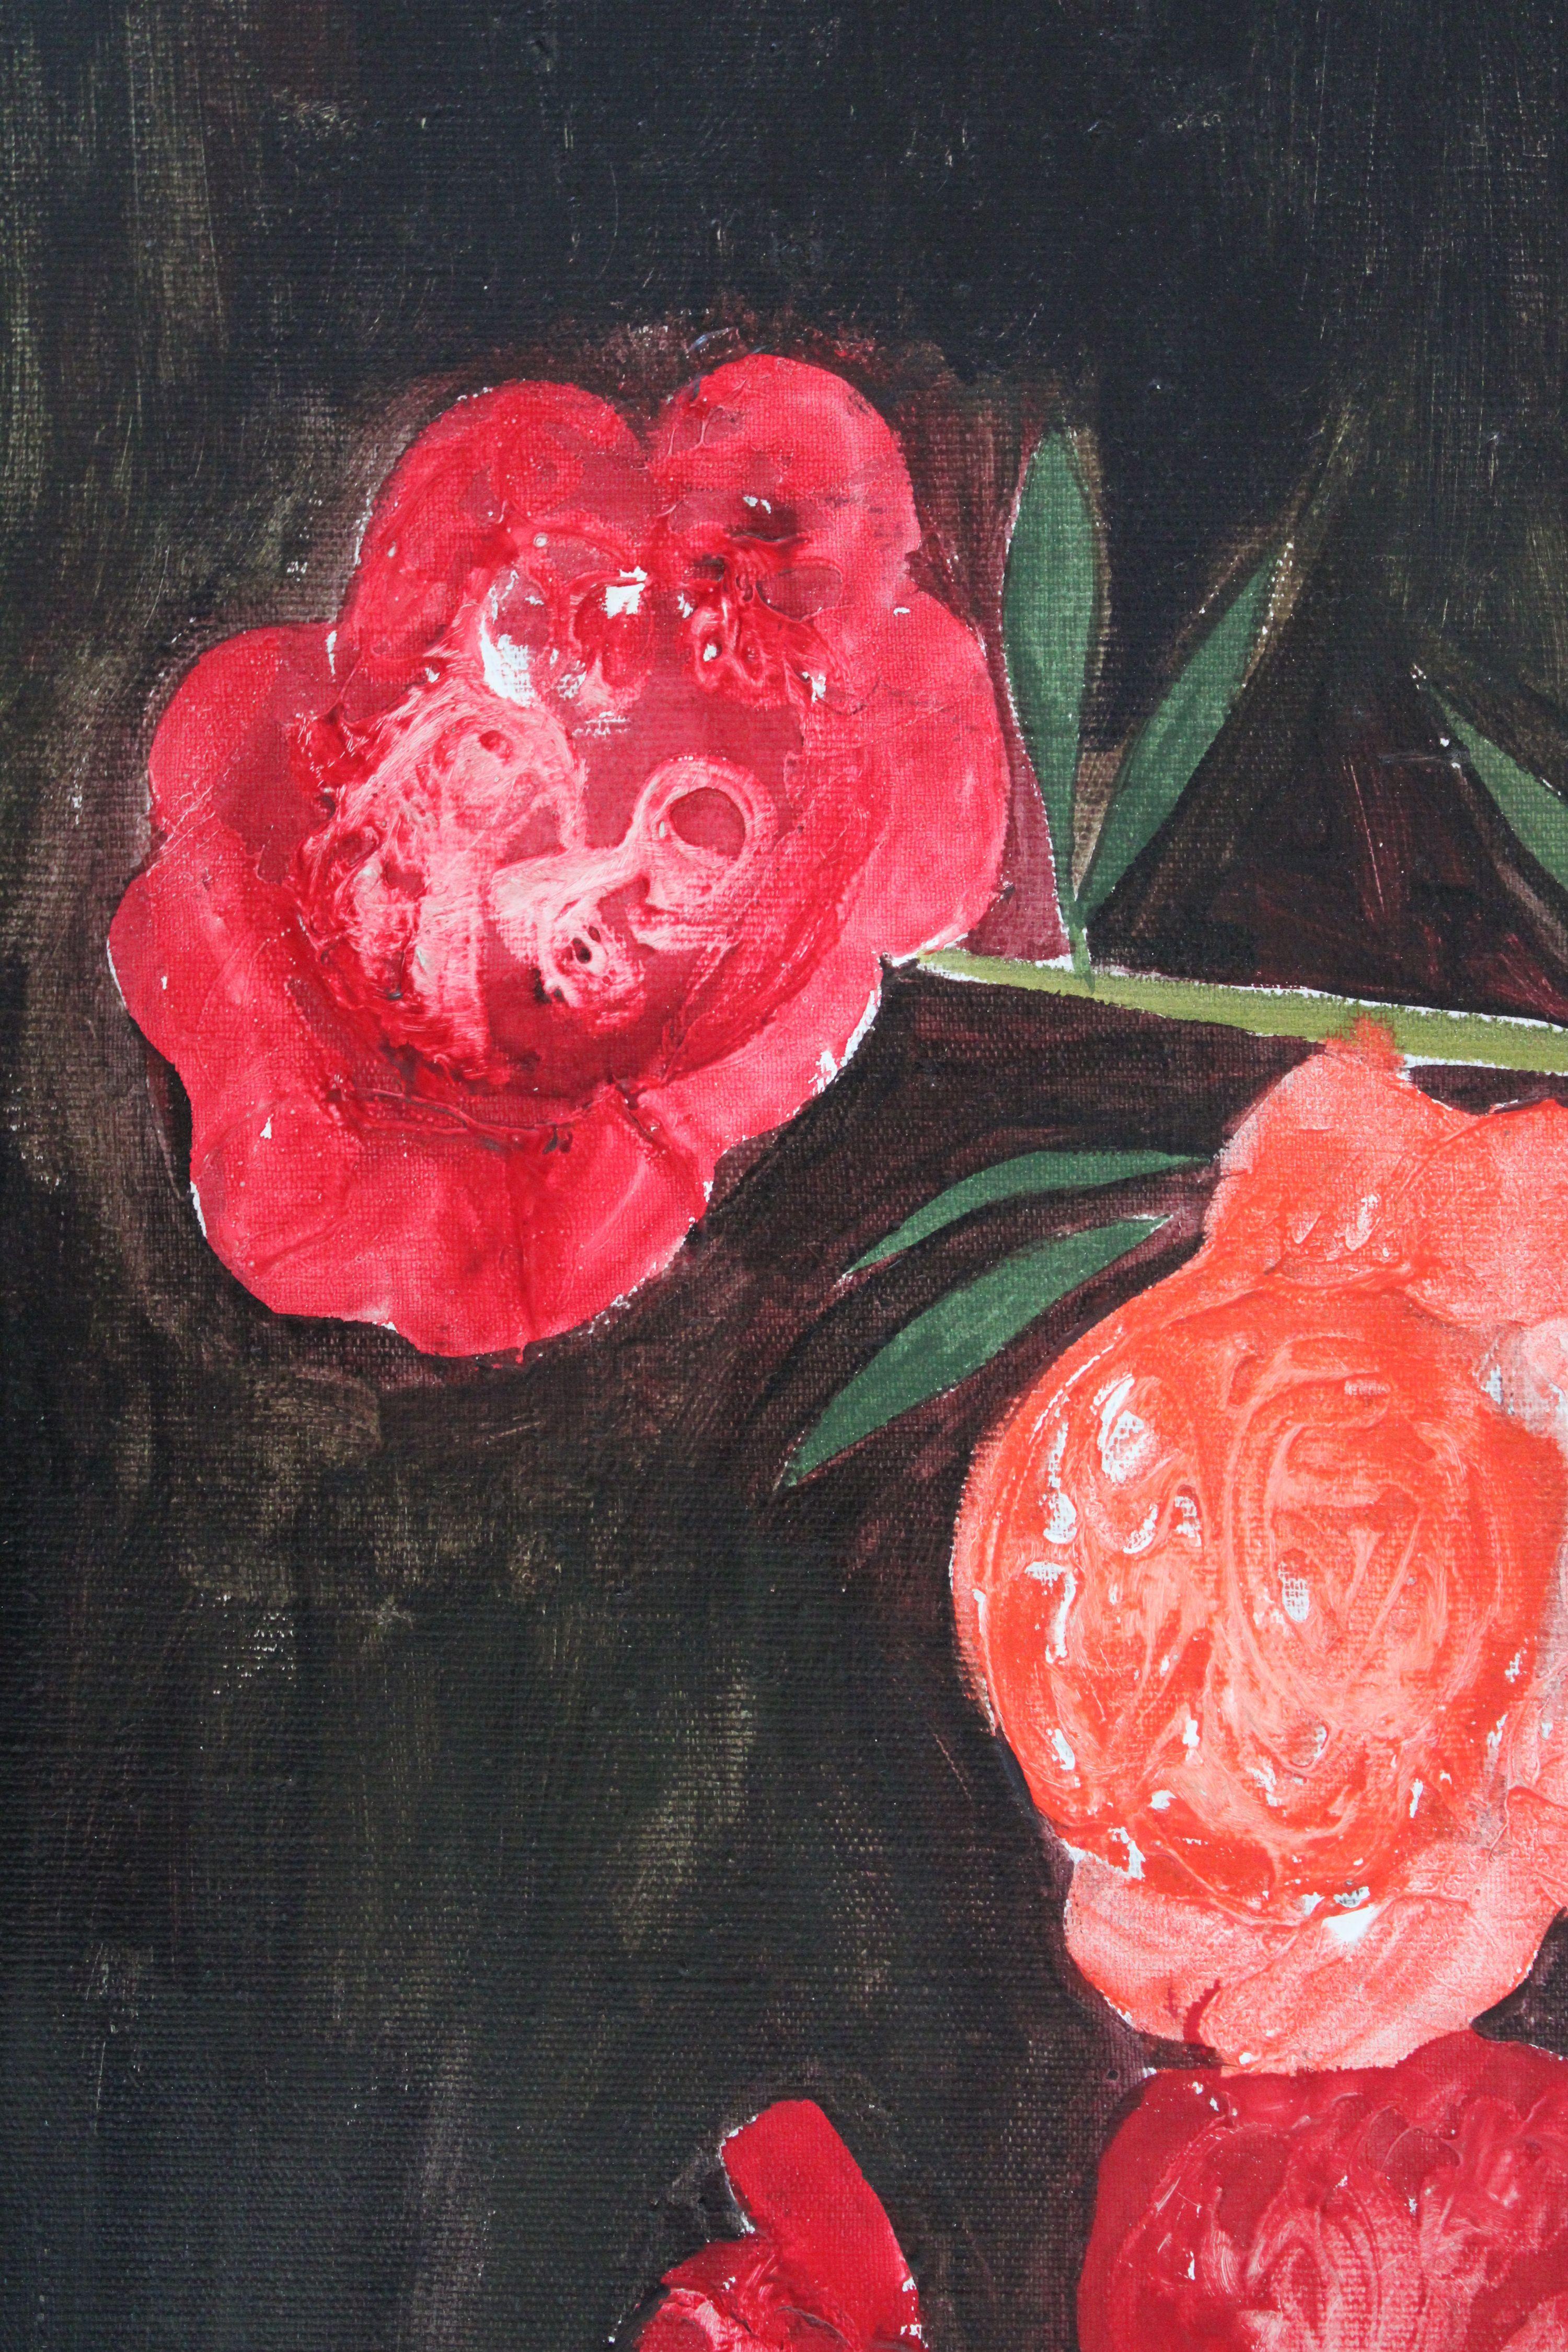 Peonies  1975. Oil on canvas, 100x92 cm - Painting by Laimdots Murnieks